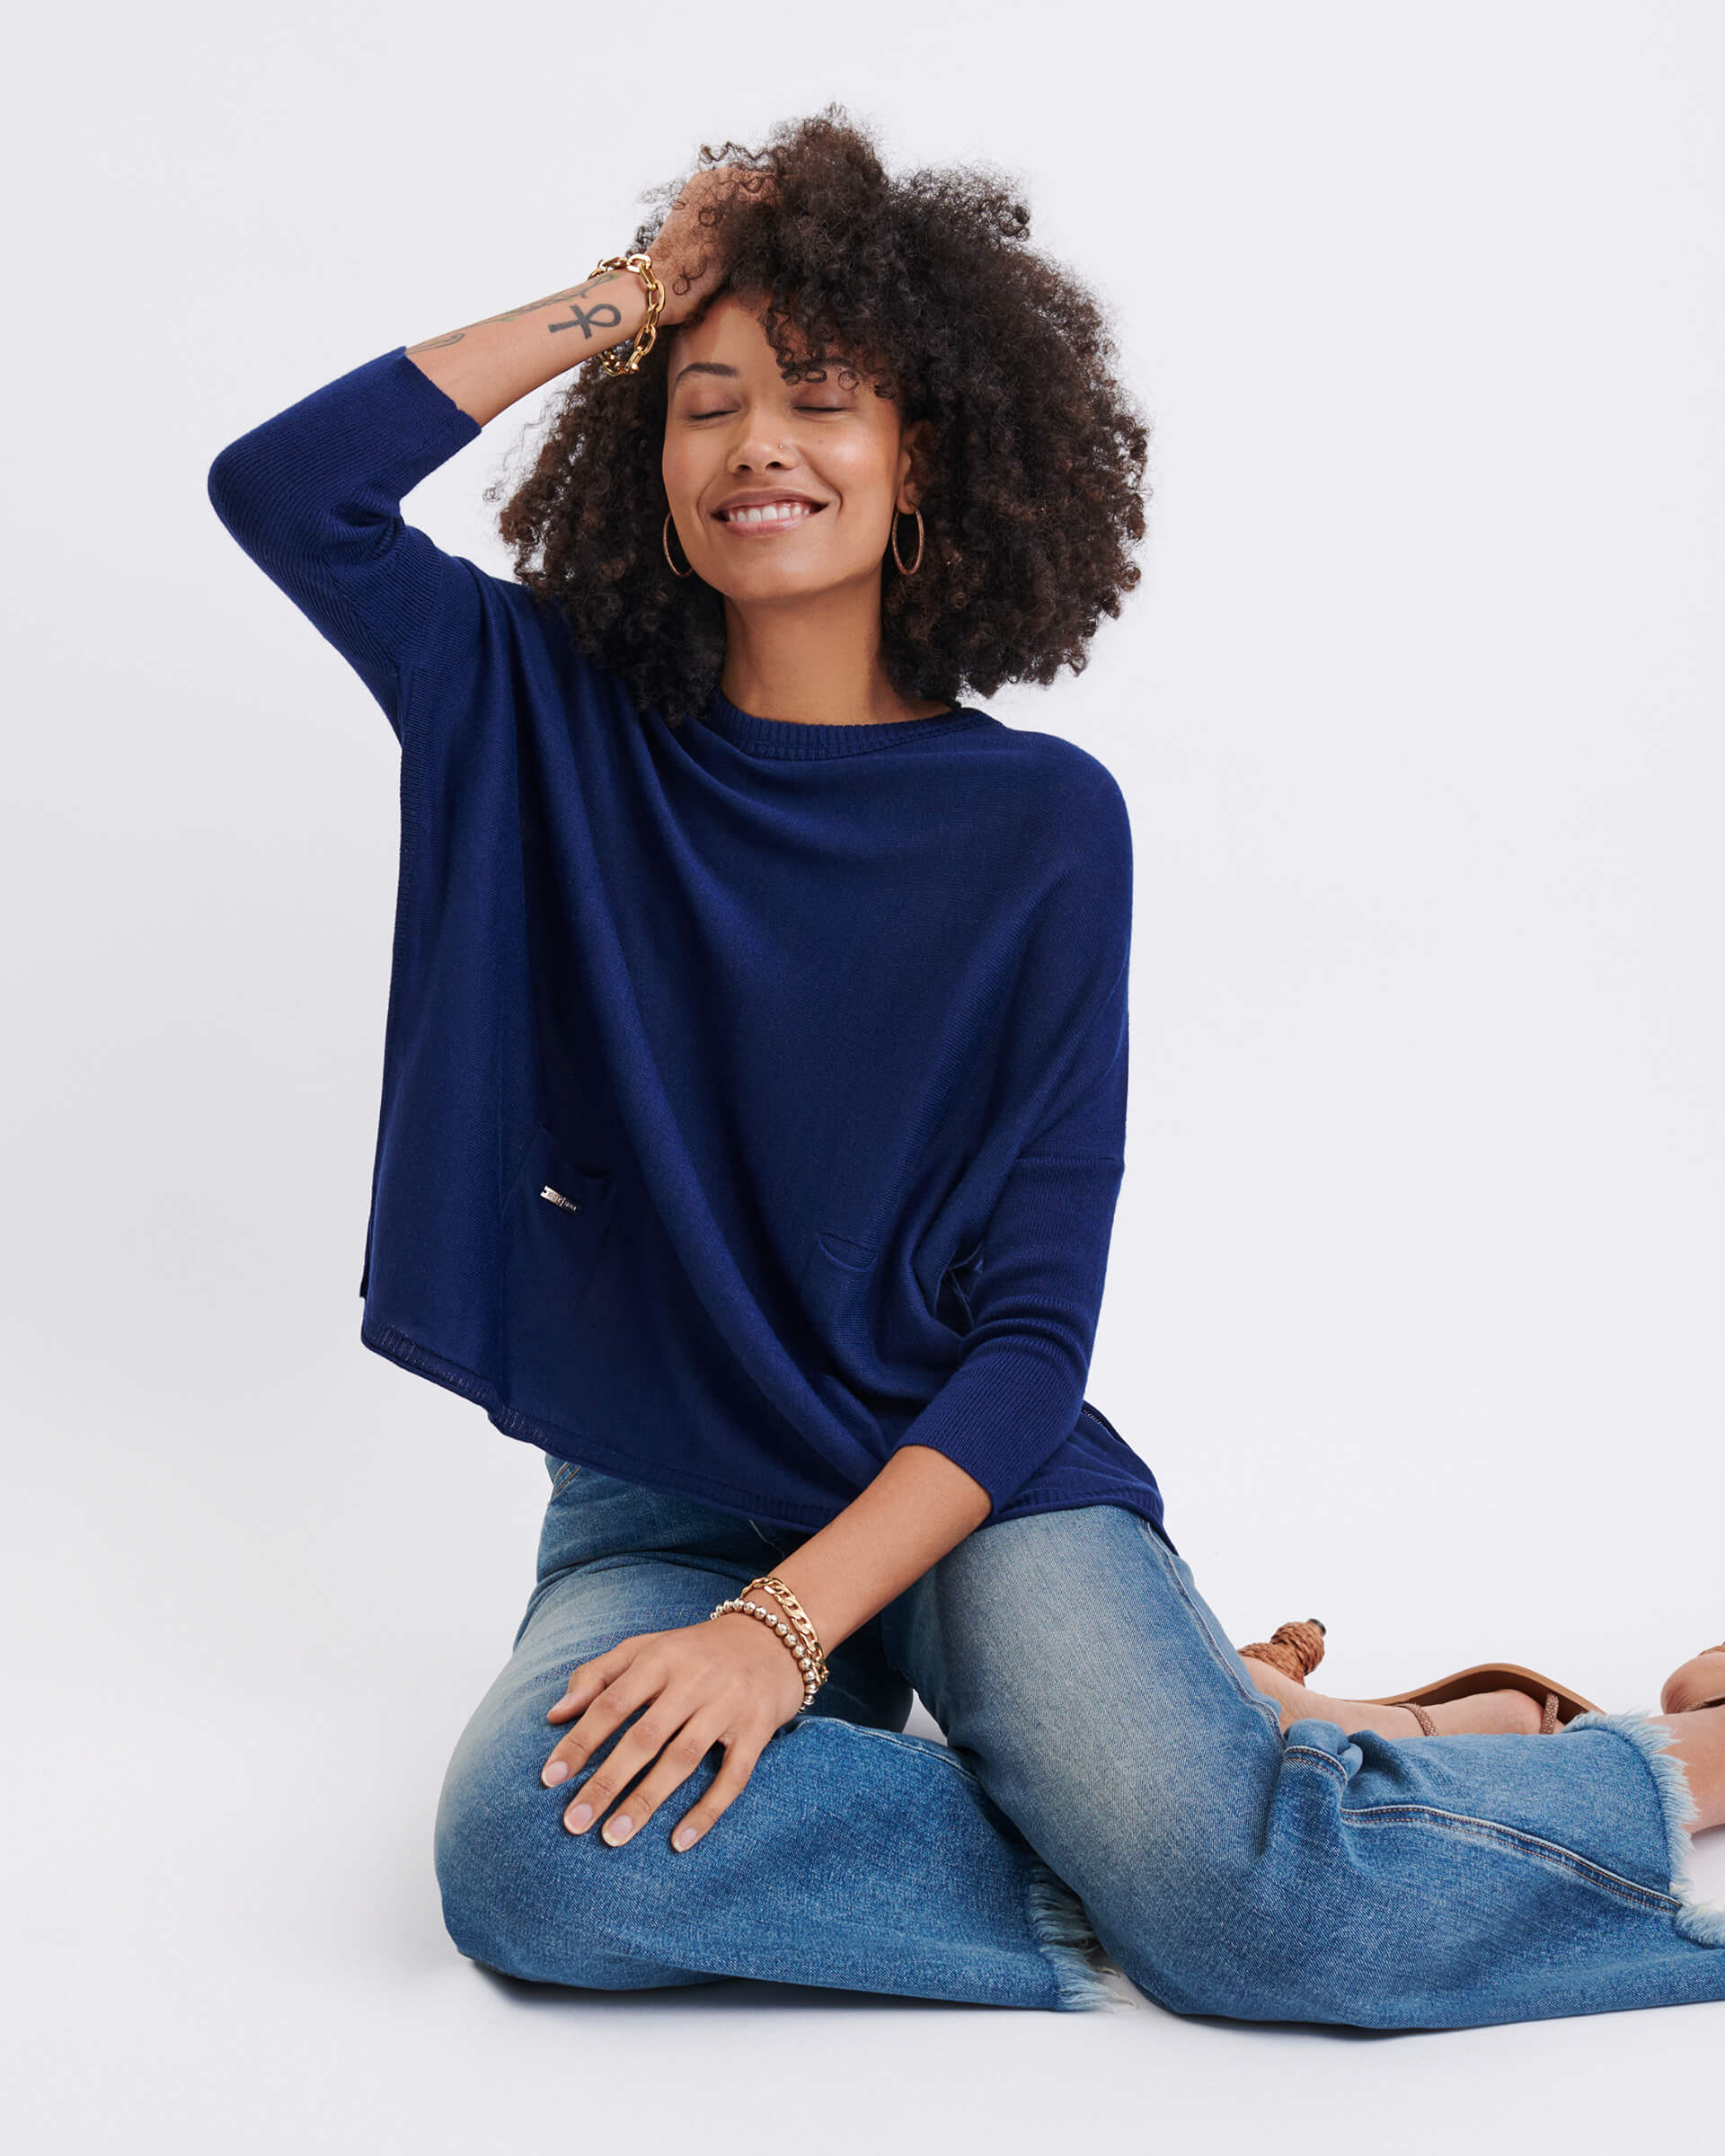 curly haired female wearing dark blue sweater sitting with a hand to her head on a white background